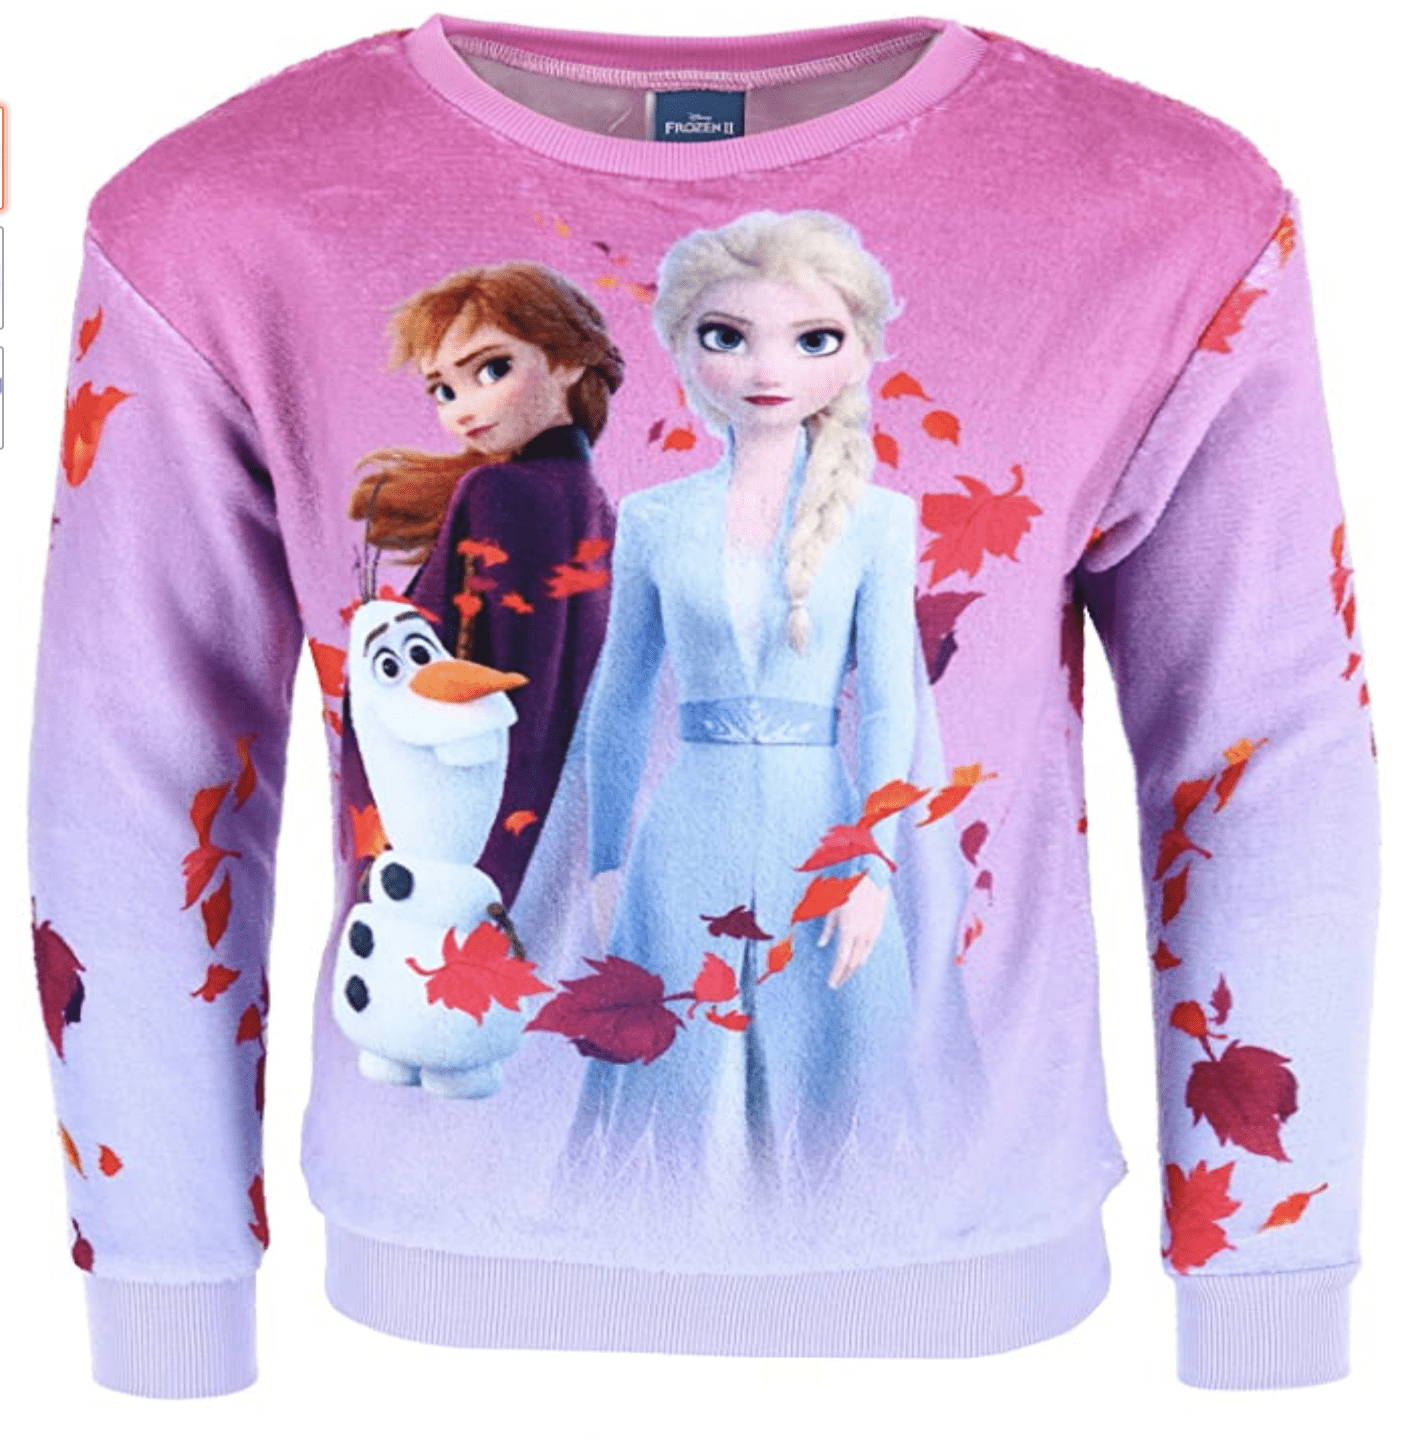 Disney Frozen Elsa Anna Olaf Girls Teal Sweatshirt Size Large New Without  Tags